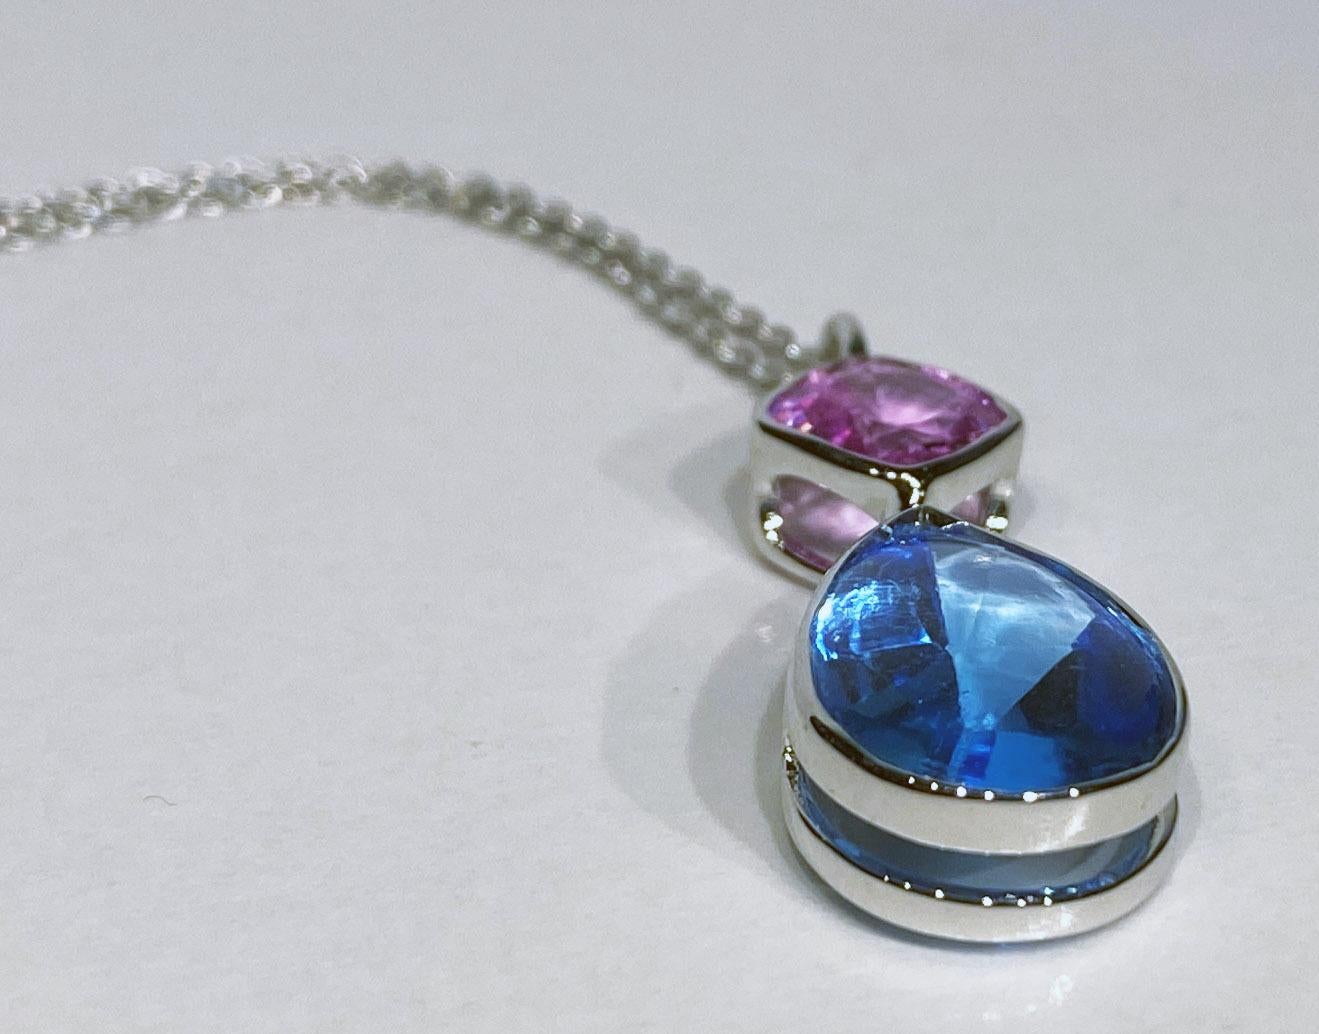 An 18kt White Gold Pendant set with Blue Topaz & Pink Sapphire. 18kt White Gold weight is 4.7 Grams. Blue Topaz is a Cabochon Dome Top with a Faceted Pavillion in a Pear Cut. Topaz  weight is 3.885 Carats, Pink Sapphire Cushion cut weight is 1.98